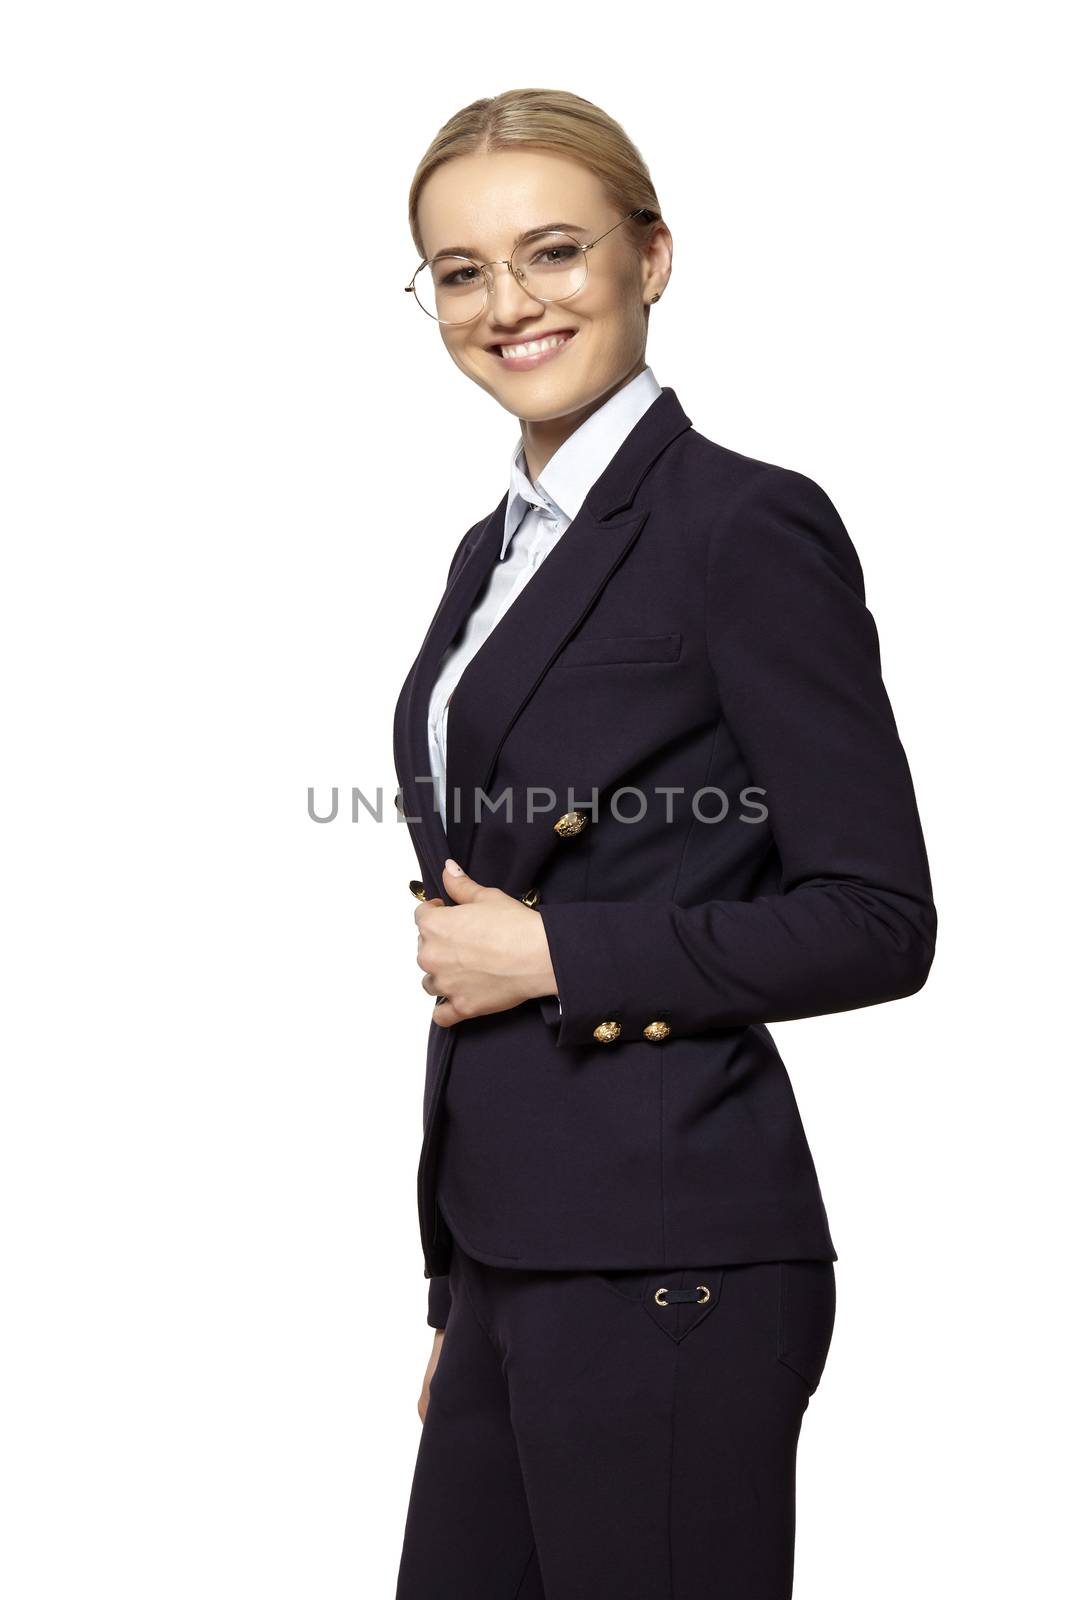 Studio portrait of young happy smiling business woman in a gold eyeglasses and dark business suit.